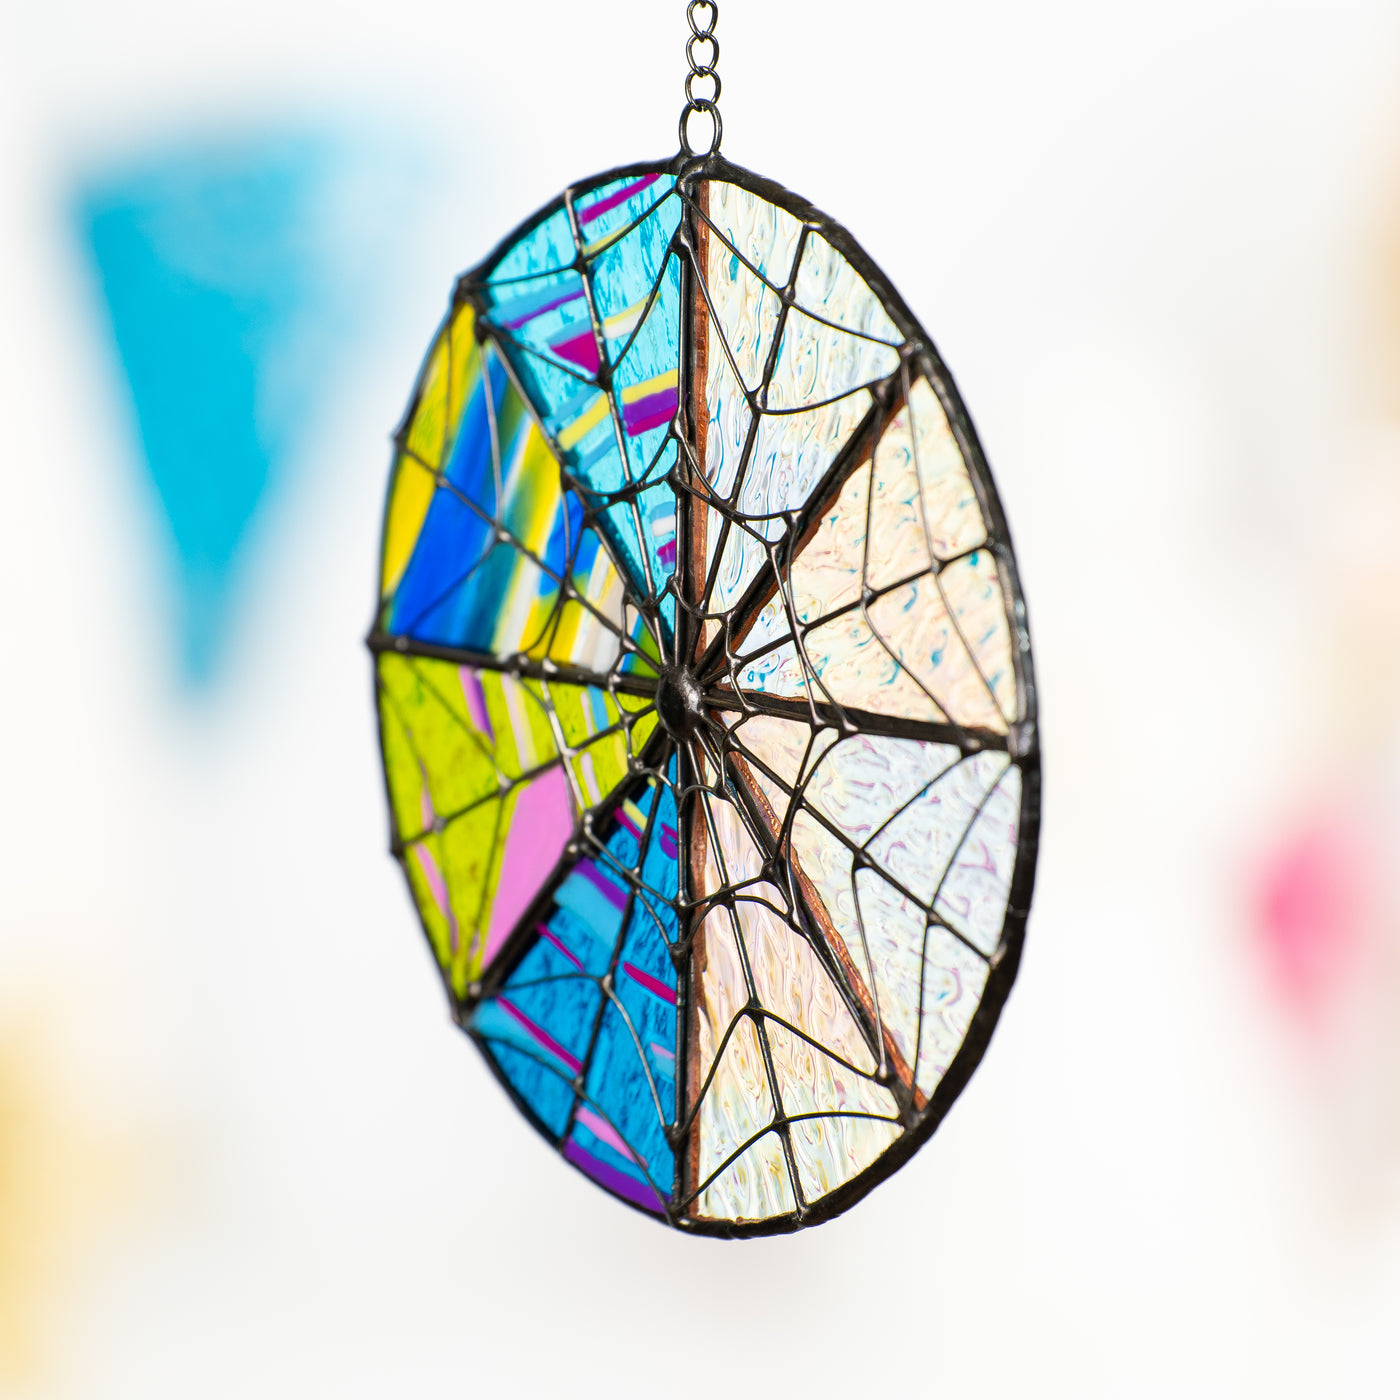 Side-view of the Wednesday's stained glass suncatcher